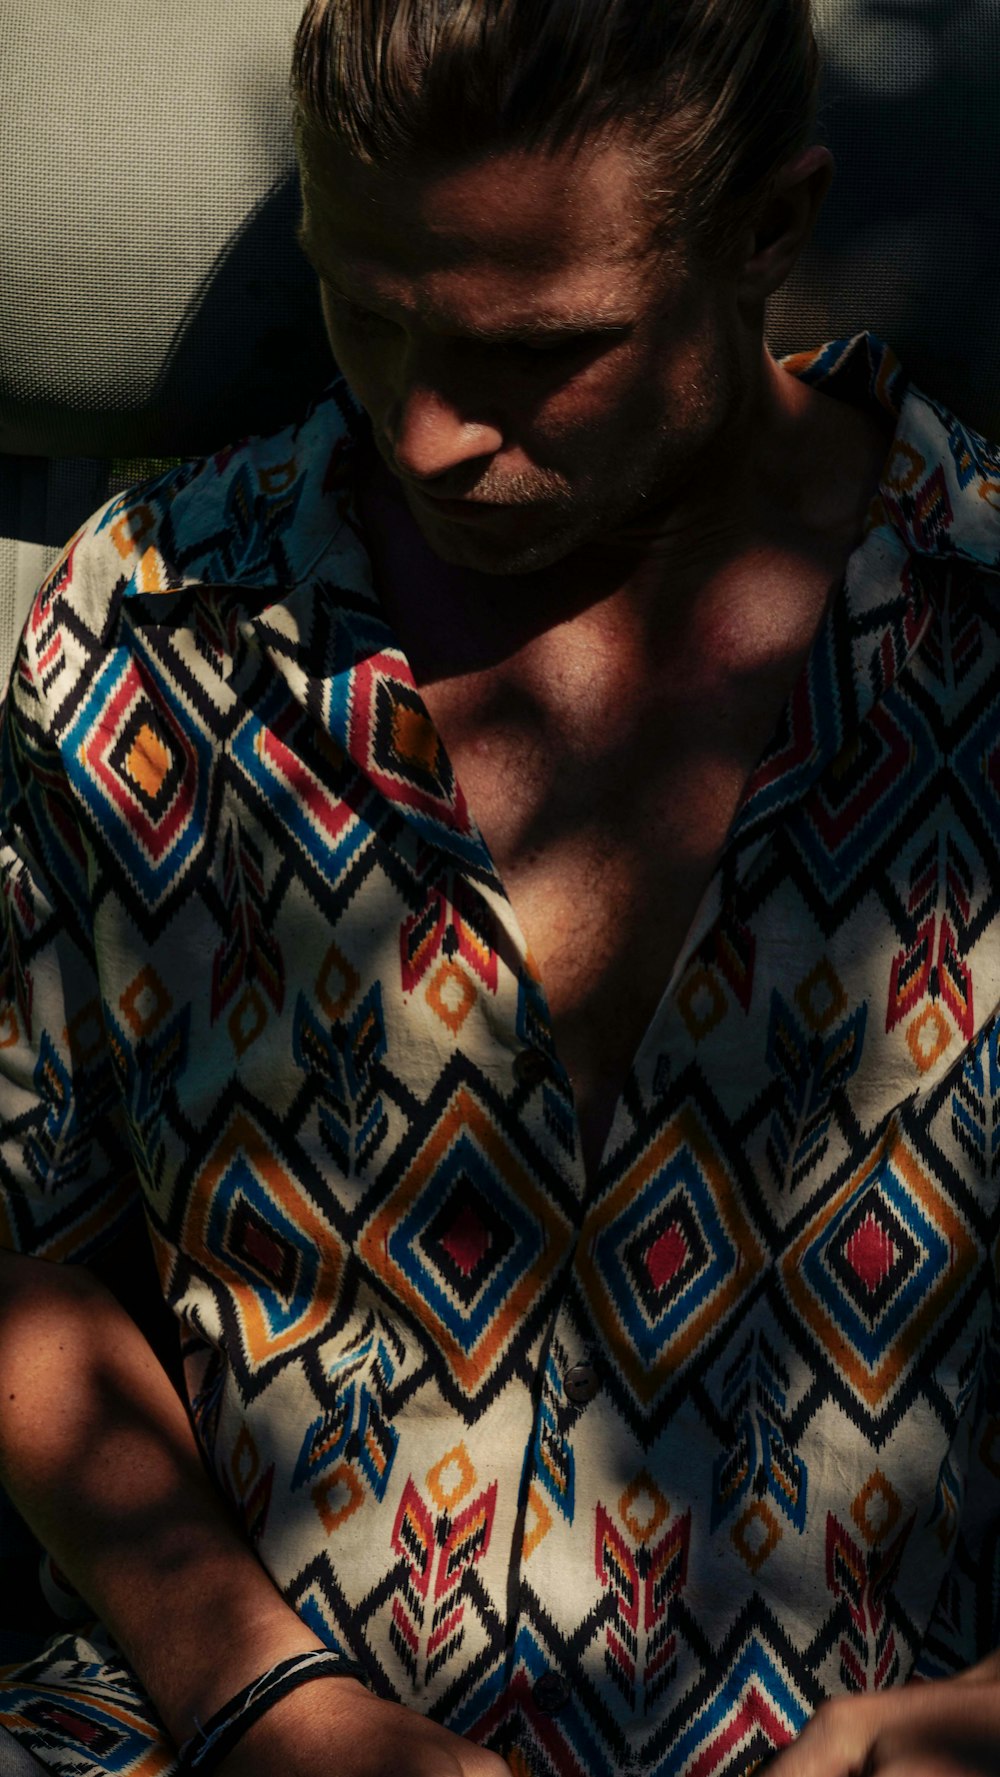 a man in a patterned shirt looking down at his cell phone